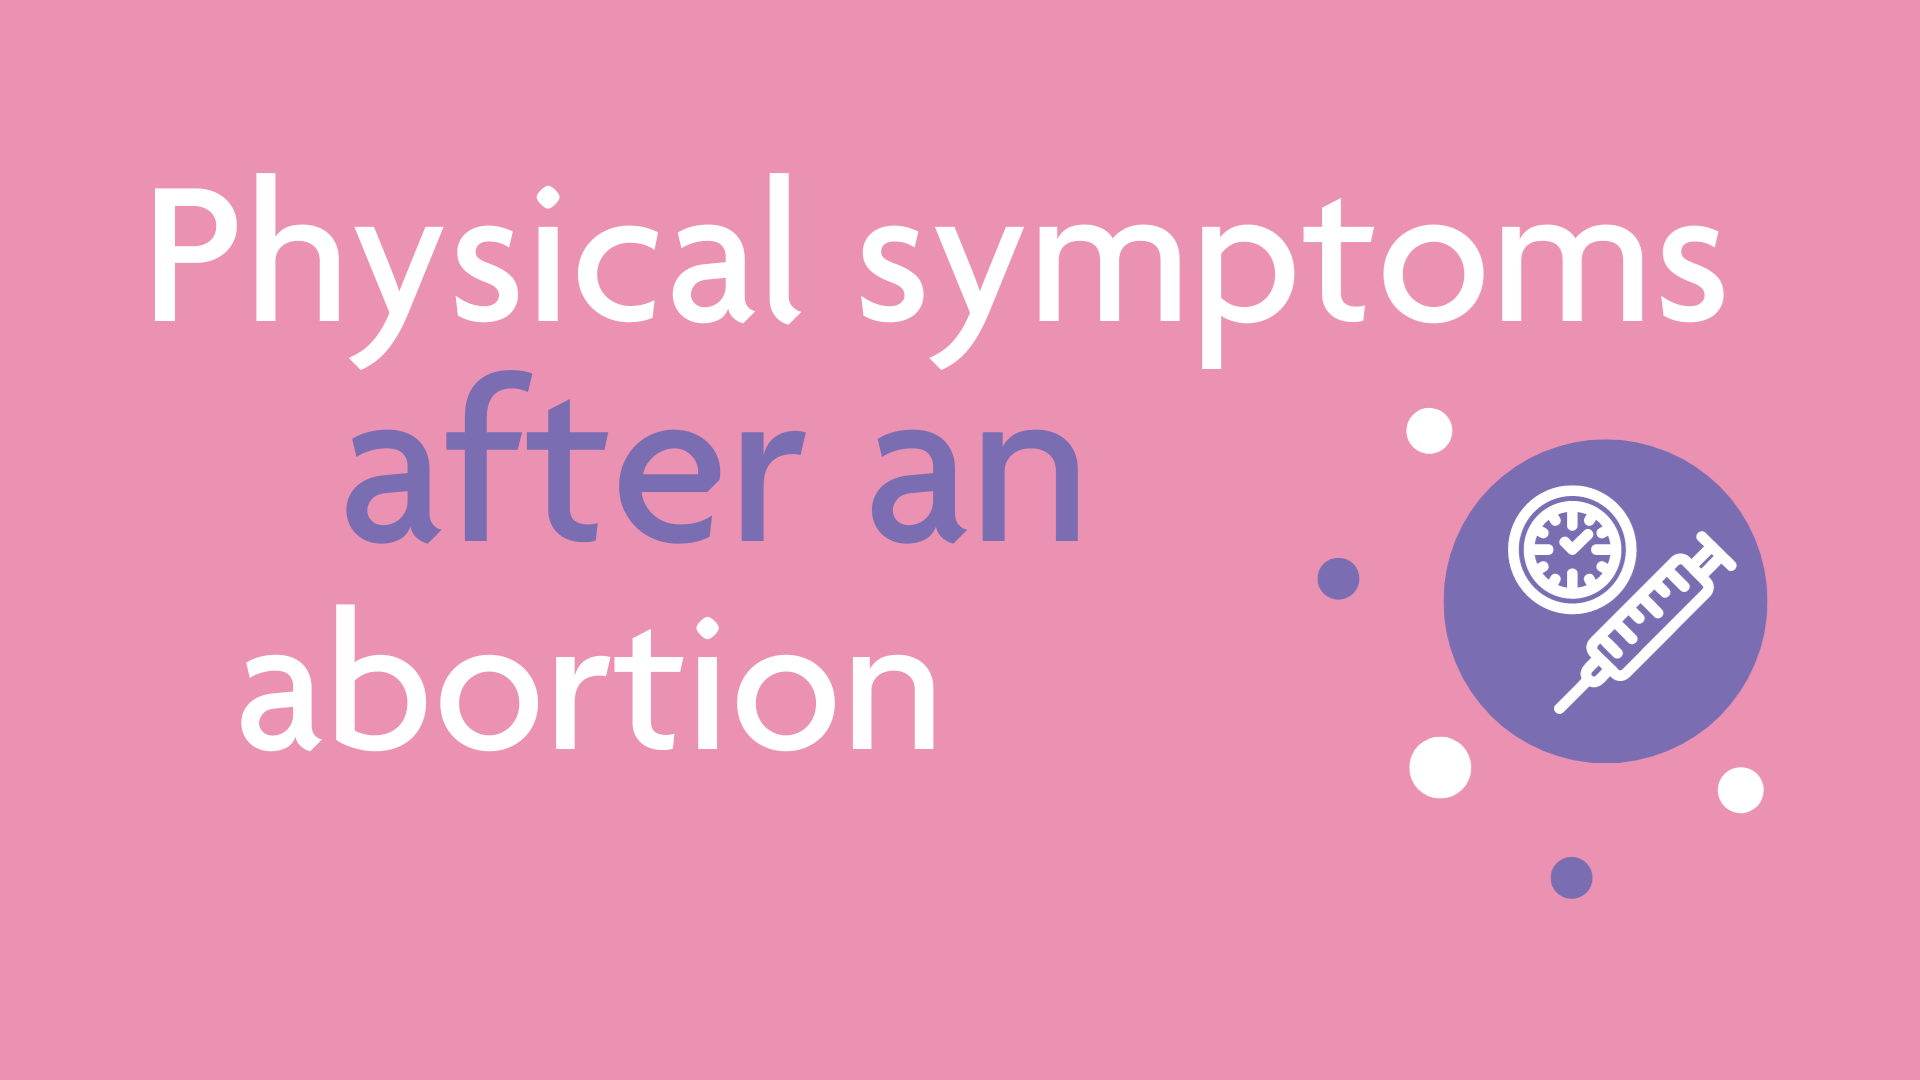 Symptoms after an abortion